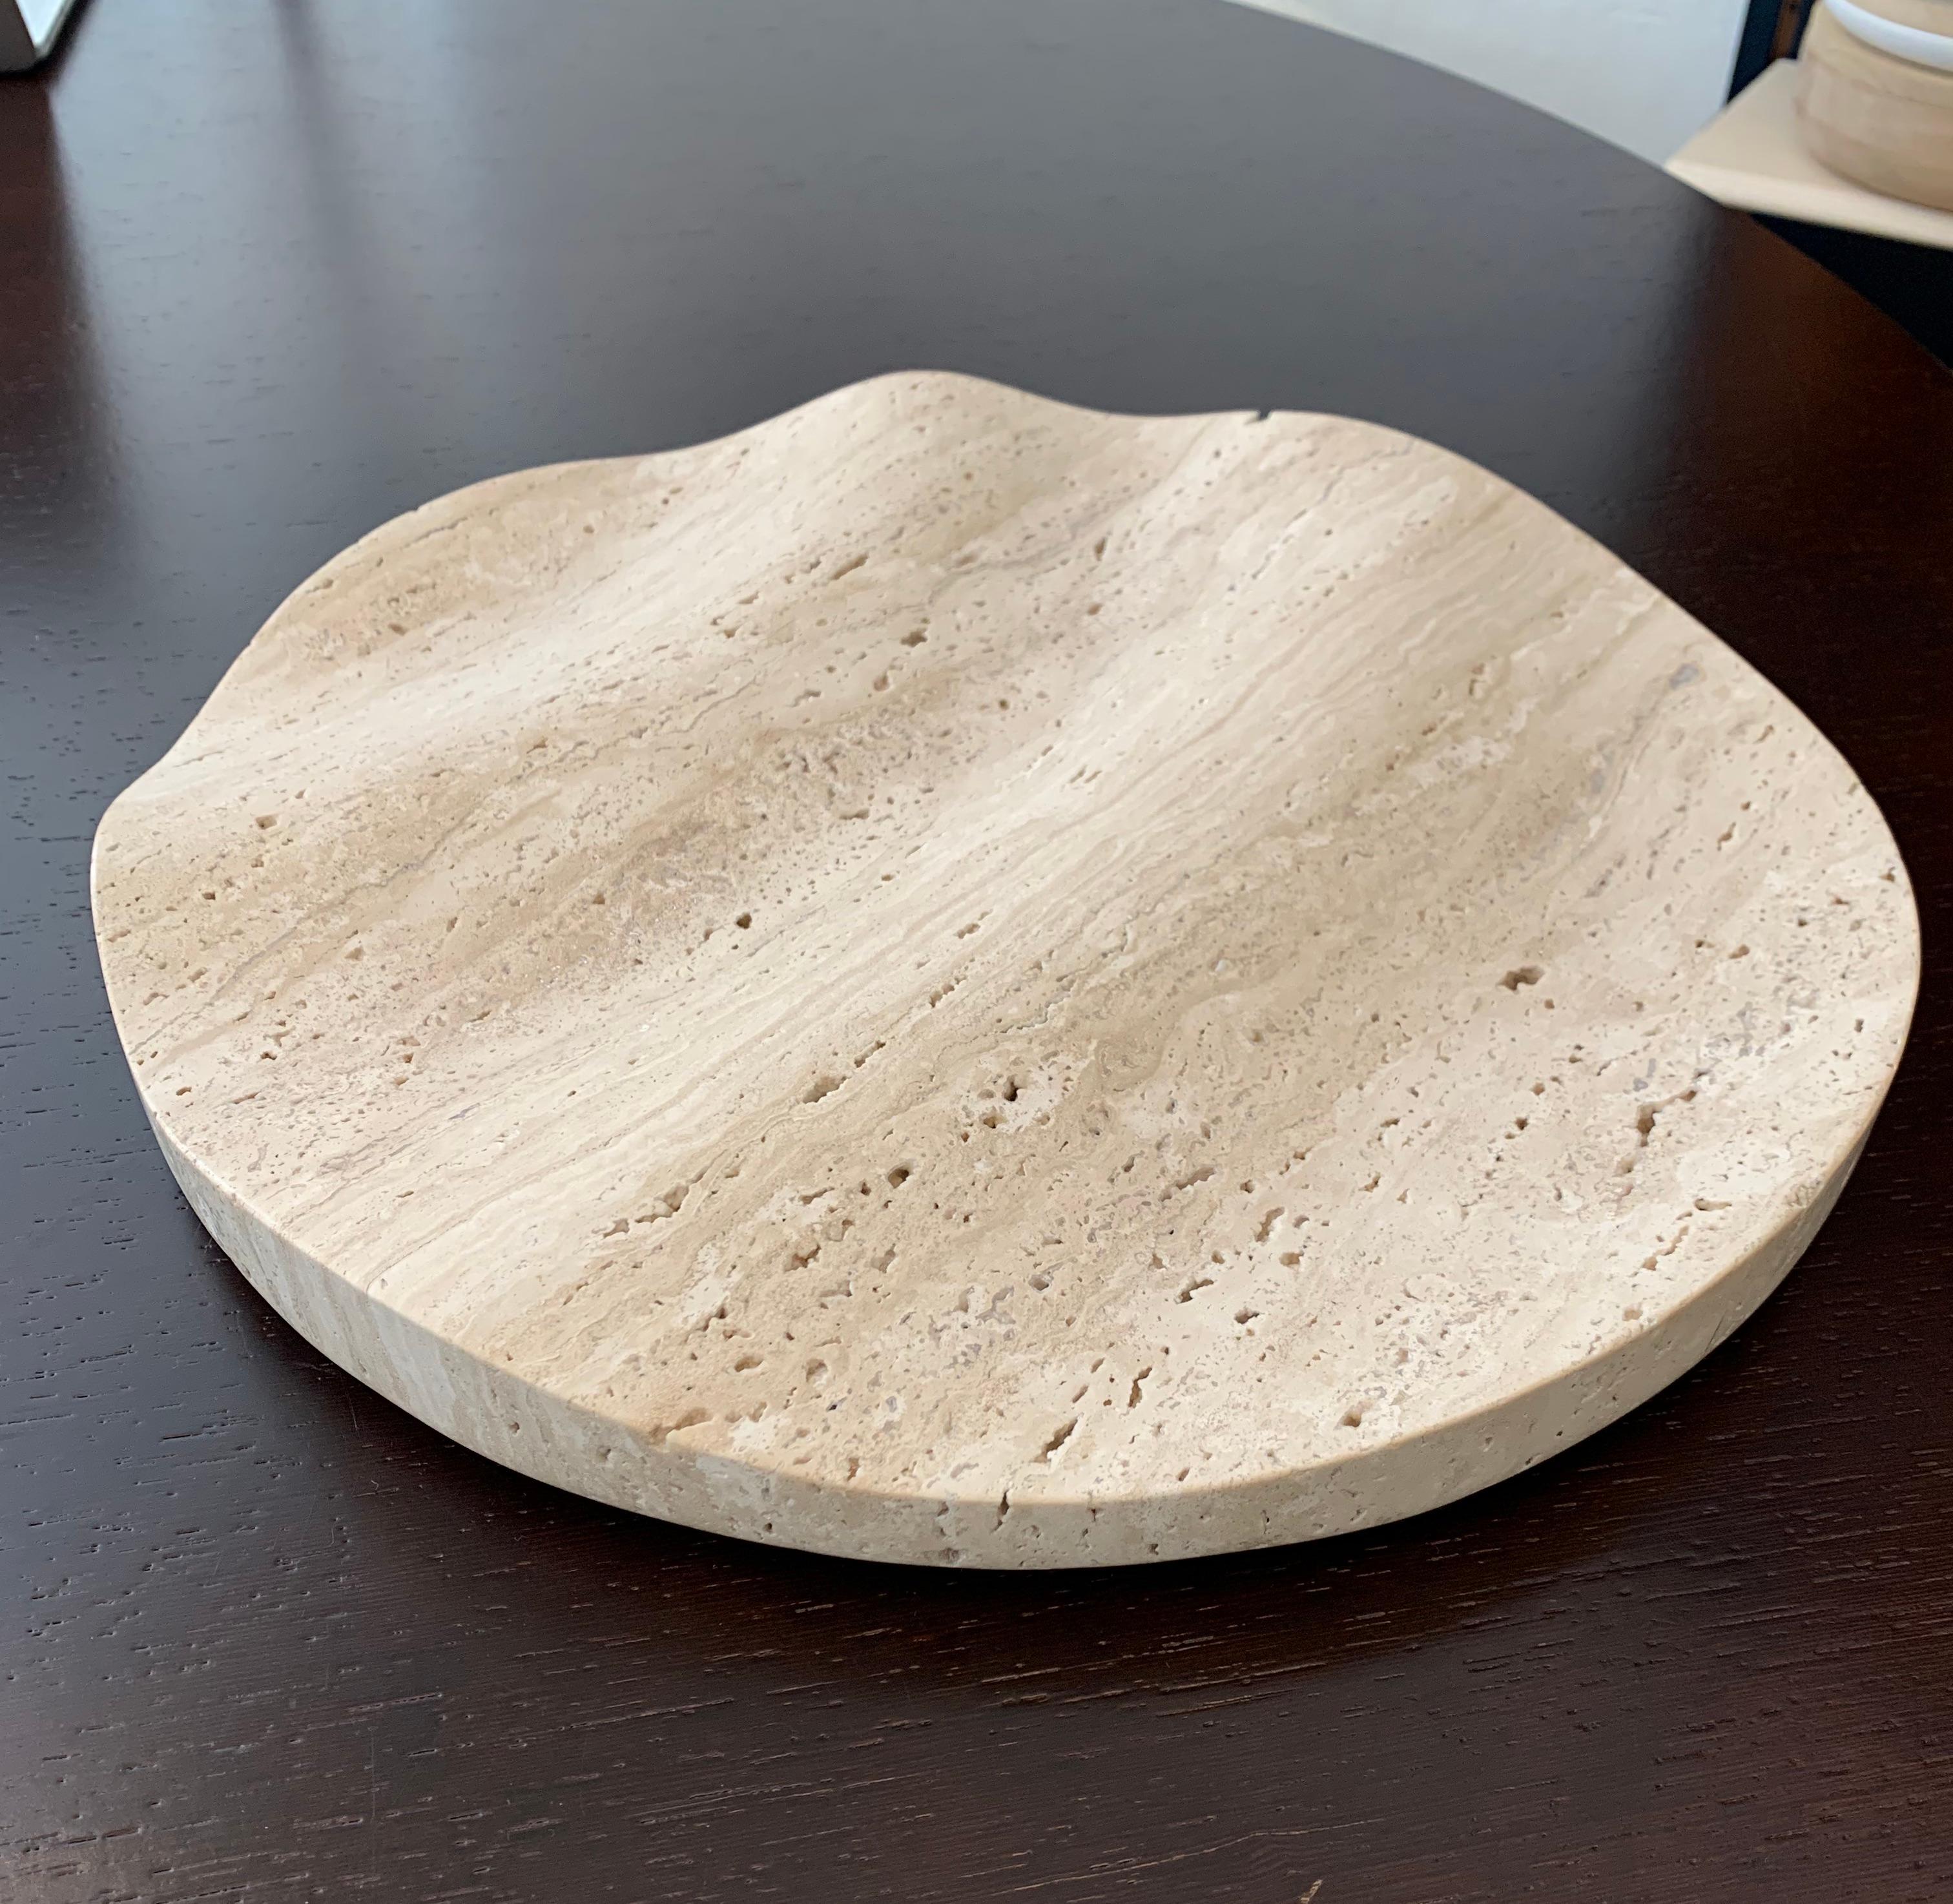 'Ripple' fruit bowl / centre piece by French renown French designer Dan Yeffet. 
Yeffet has taken an everyday object and elevated into a work of extraordinary beauty. 
This beautiful solid bowl, cut from solid travertine, features intriguing